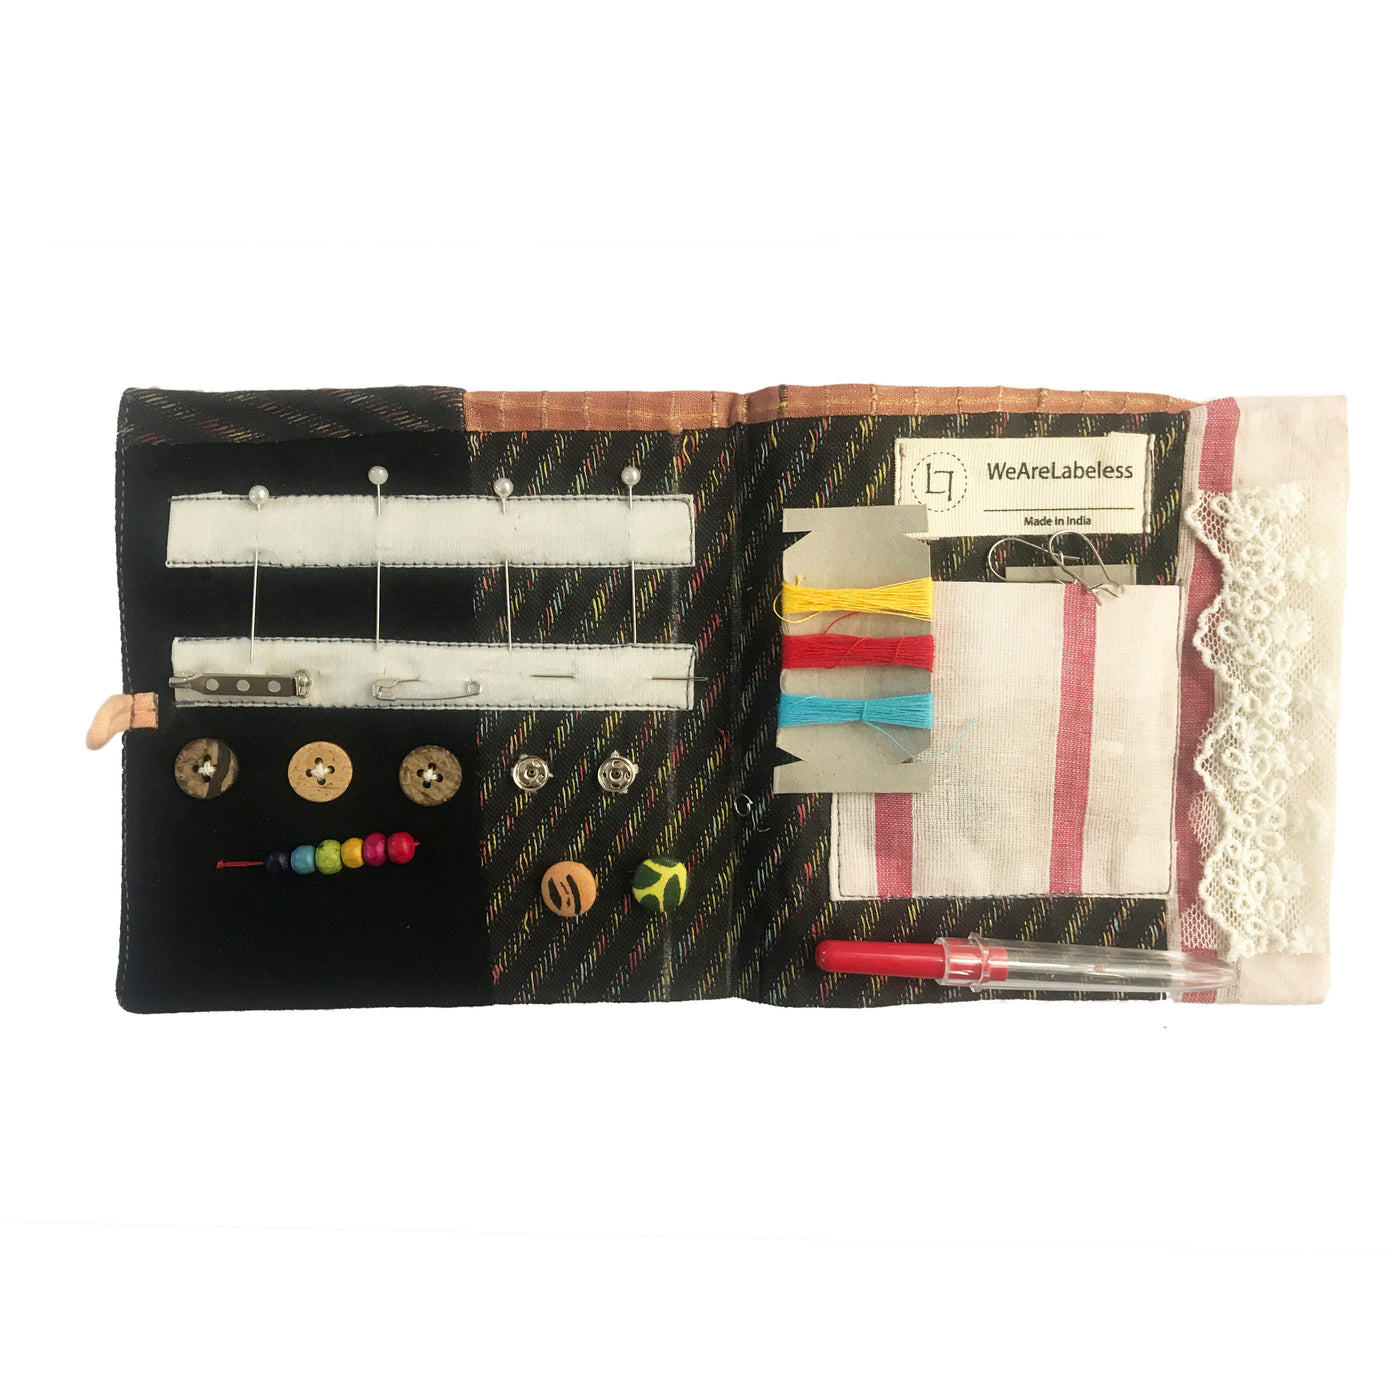 Repair Kits Made out of Handloom Cotton.